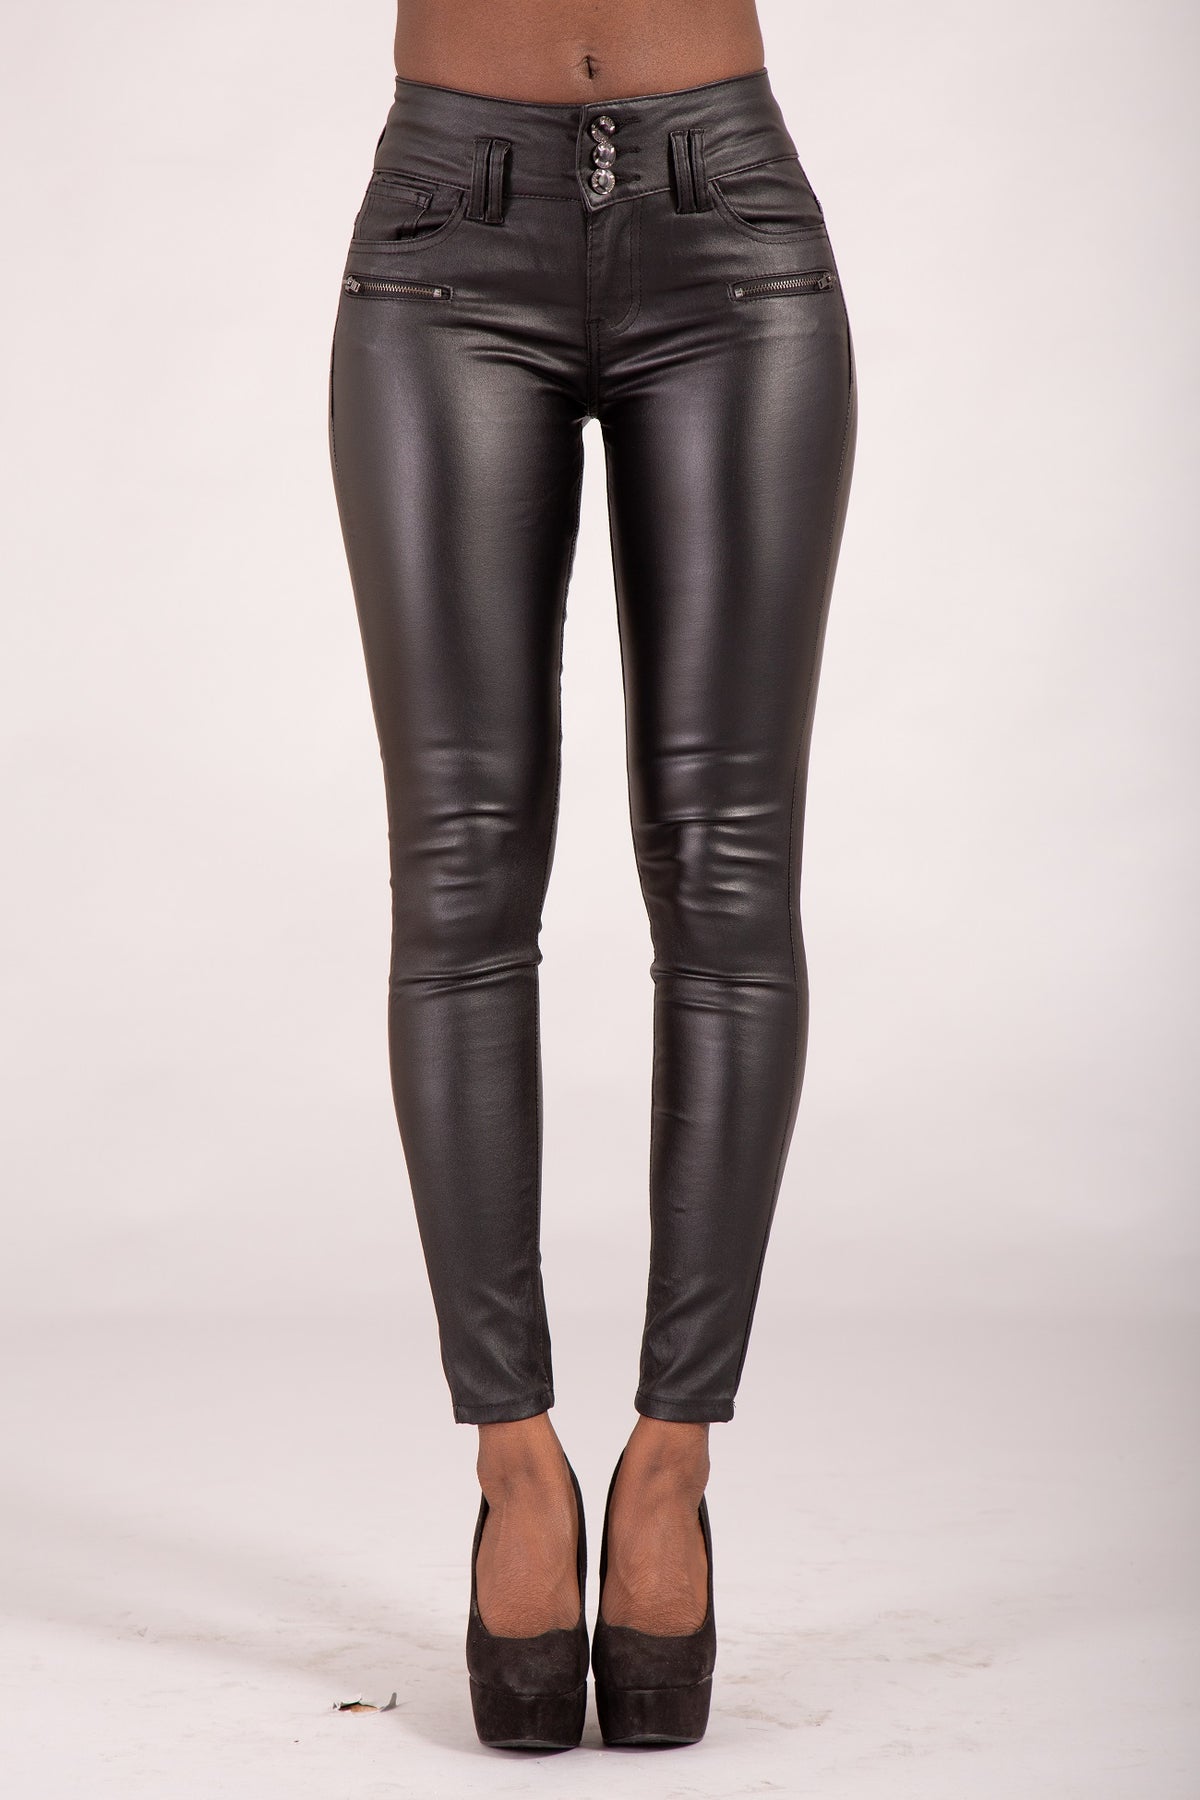 Buy Black High Waisted Button Jeans Leather Look Trousers Online